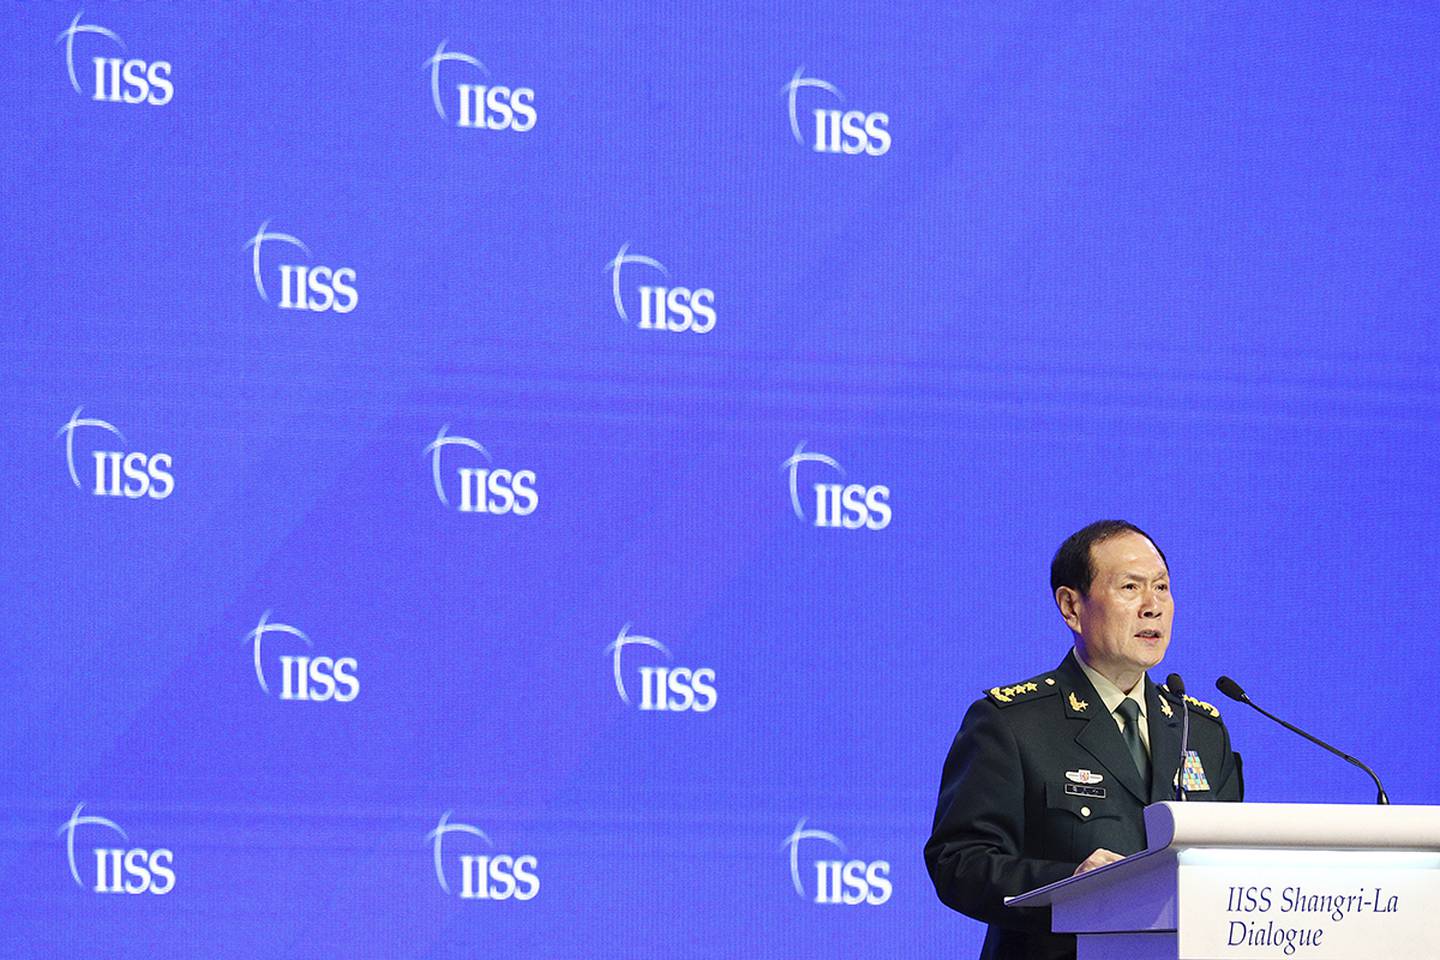 Chinese Defense Minister Gen. Wei Fenghe speaks during the fourth plenary session of the 18th International Institute for Strategic Studies (IISS) Shangri-la Dialogue